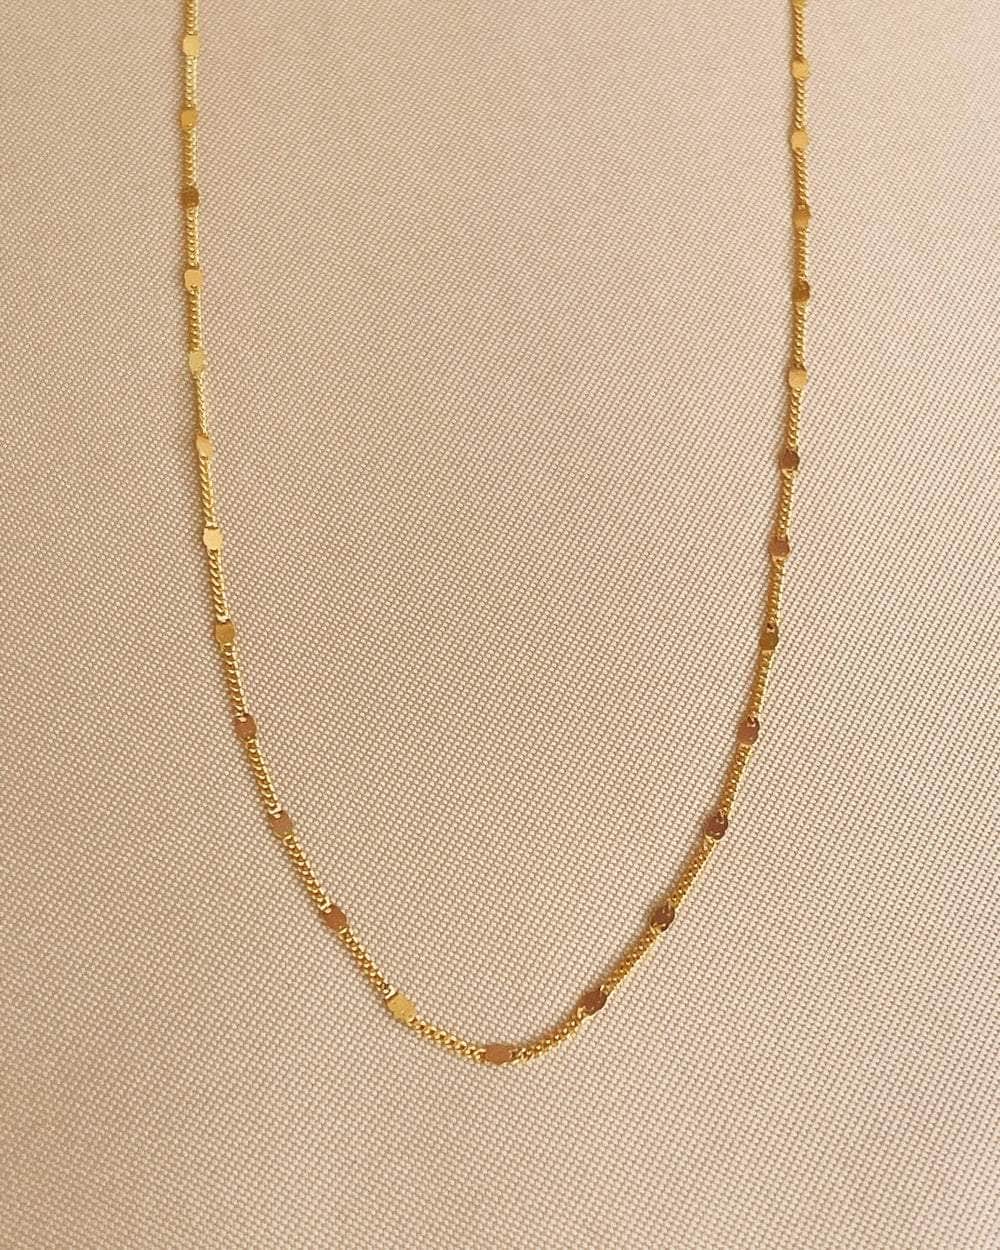 So Dainty Co. Necklaces Willow Gold Choker Necklace Gold Plated 925 Sterling Silver Jewelry